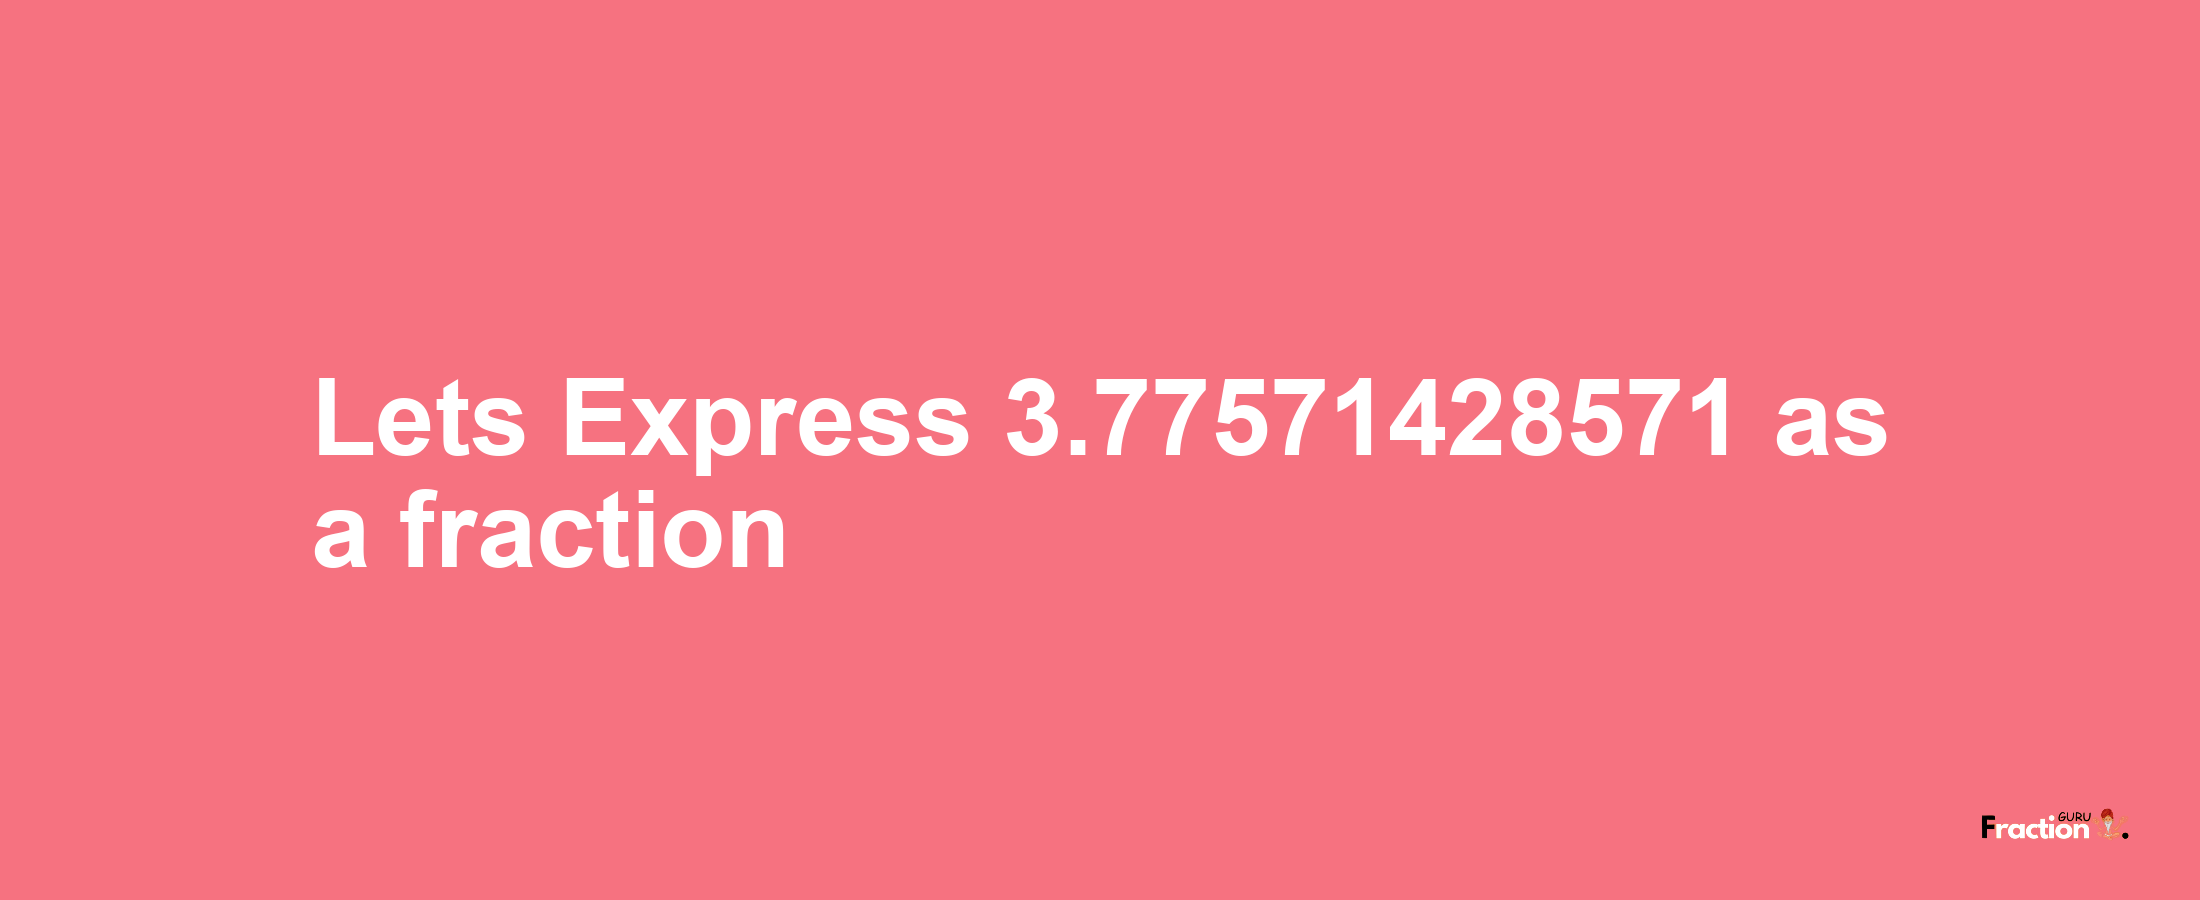 Lets Express 3.77571428571 as afraction